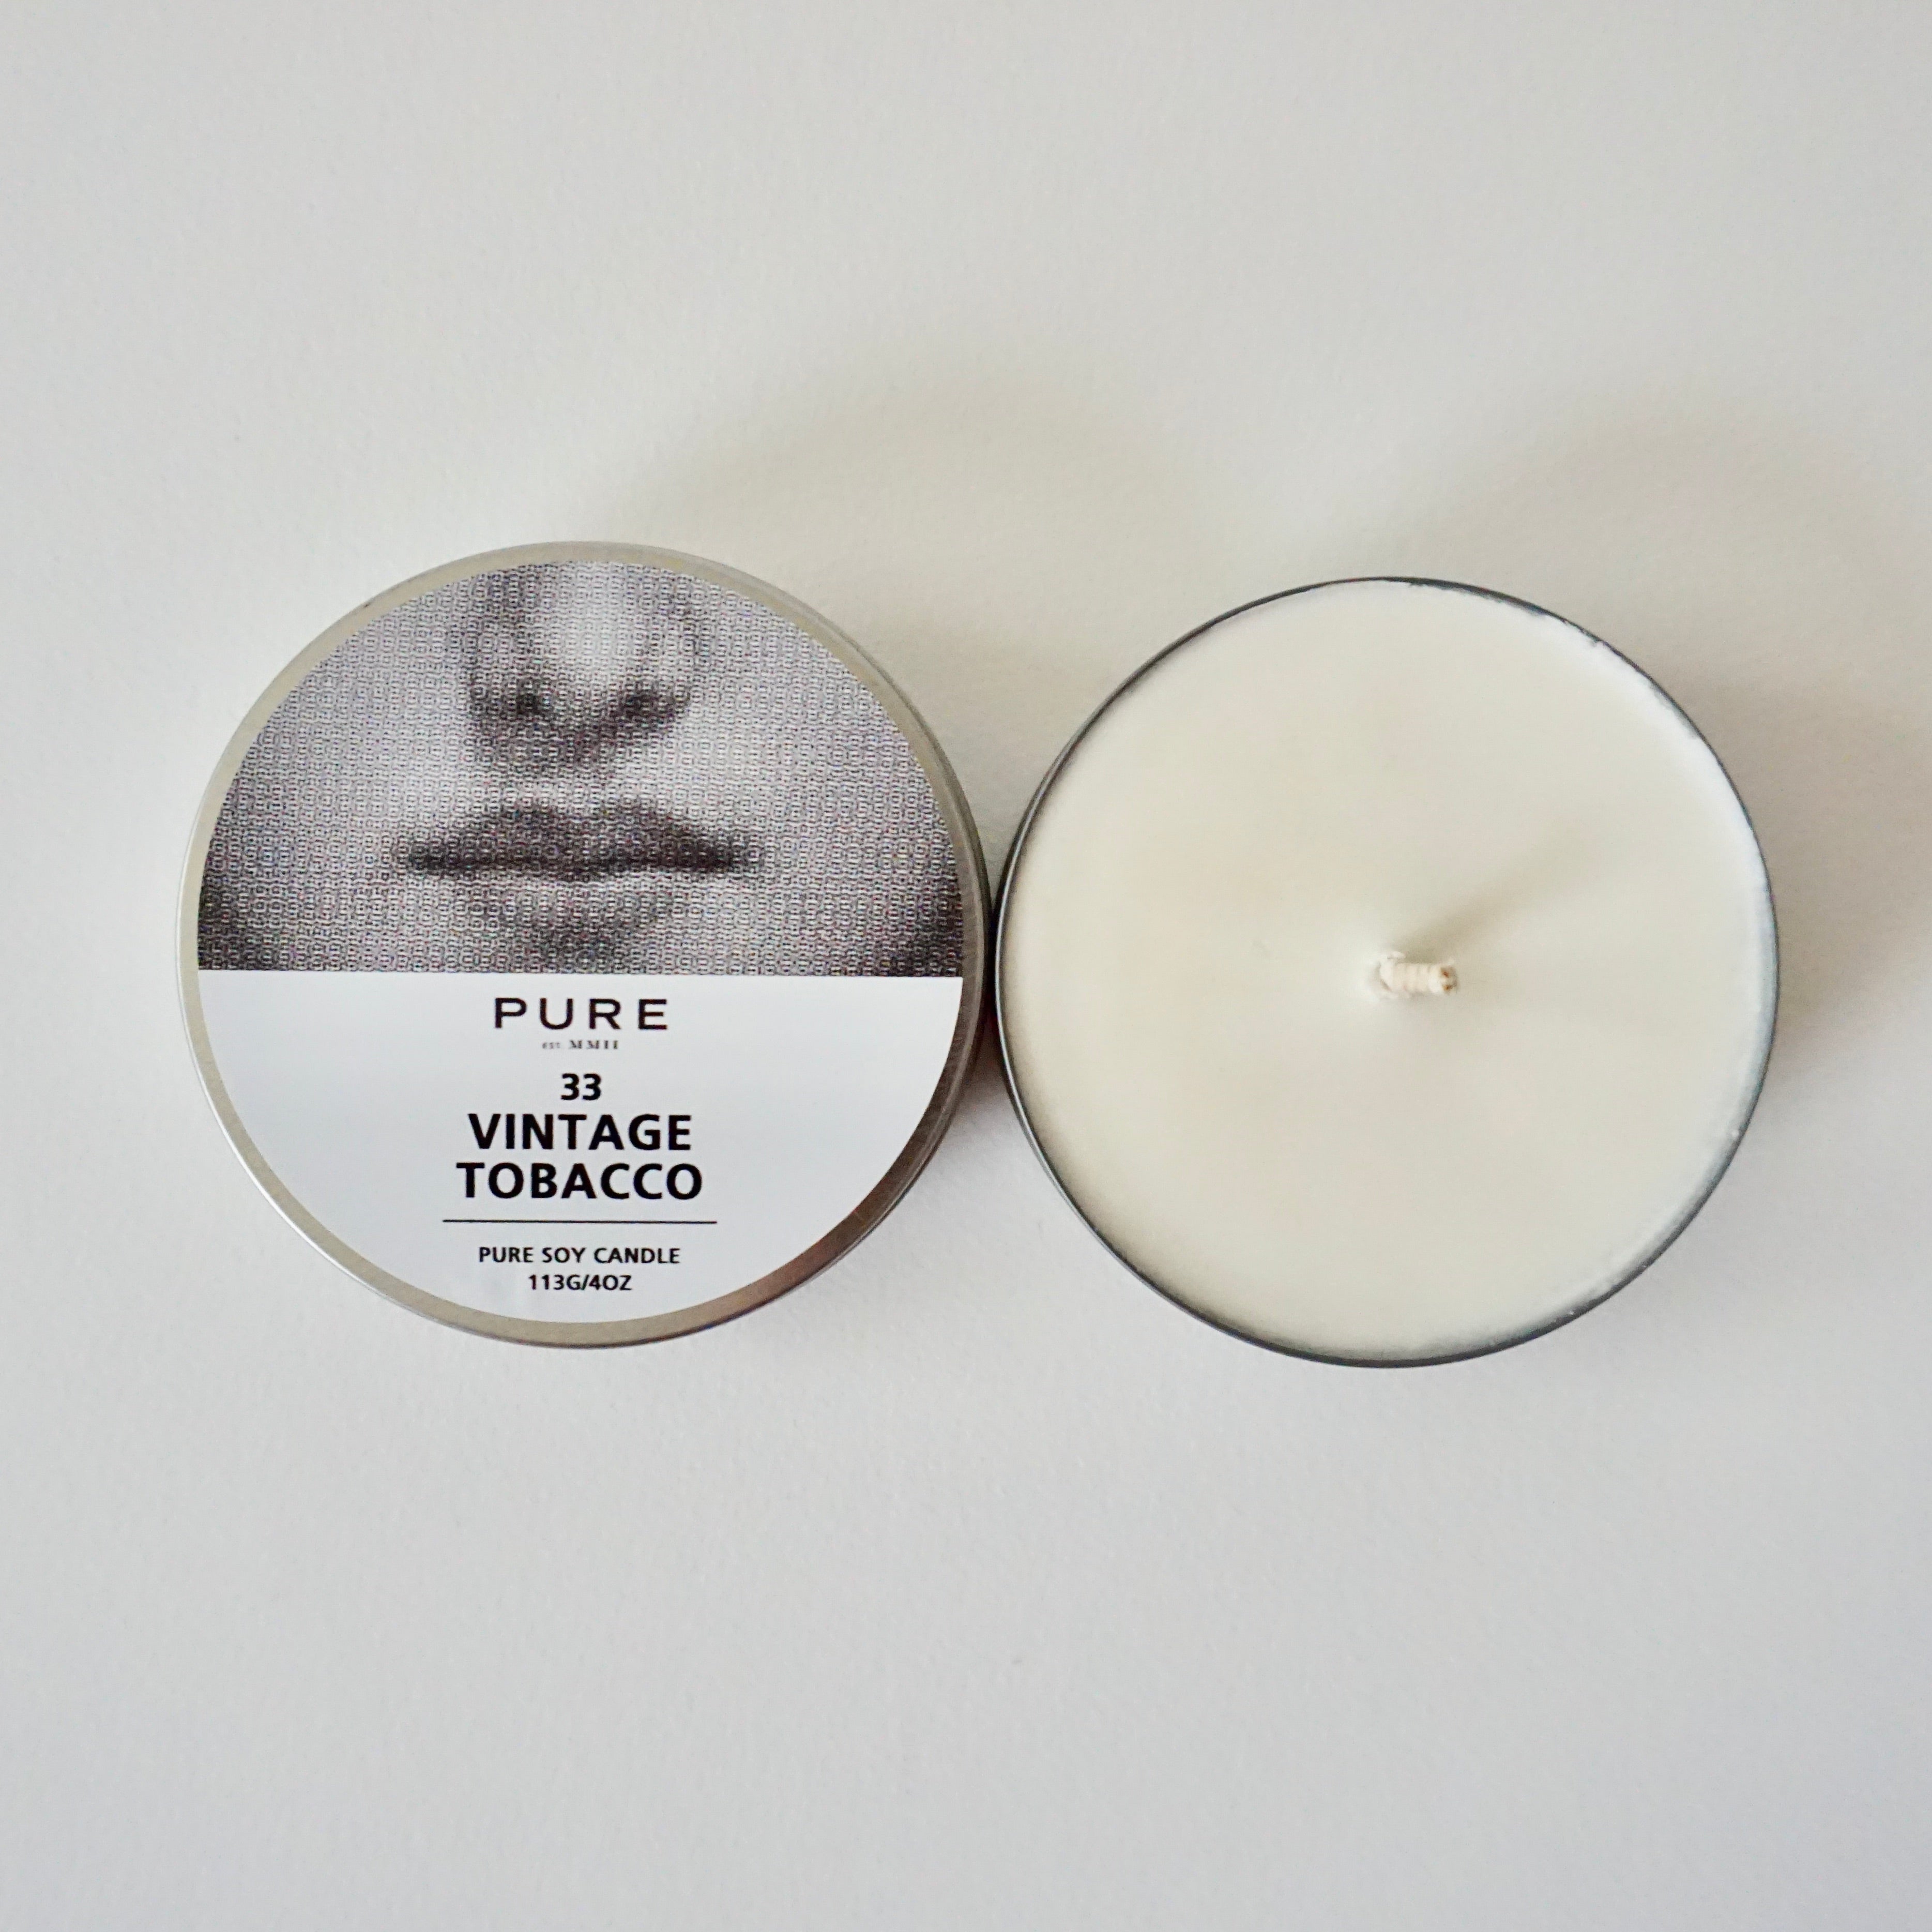 Pure Tin Candle-Vintage Tobacco 33